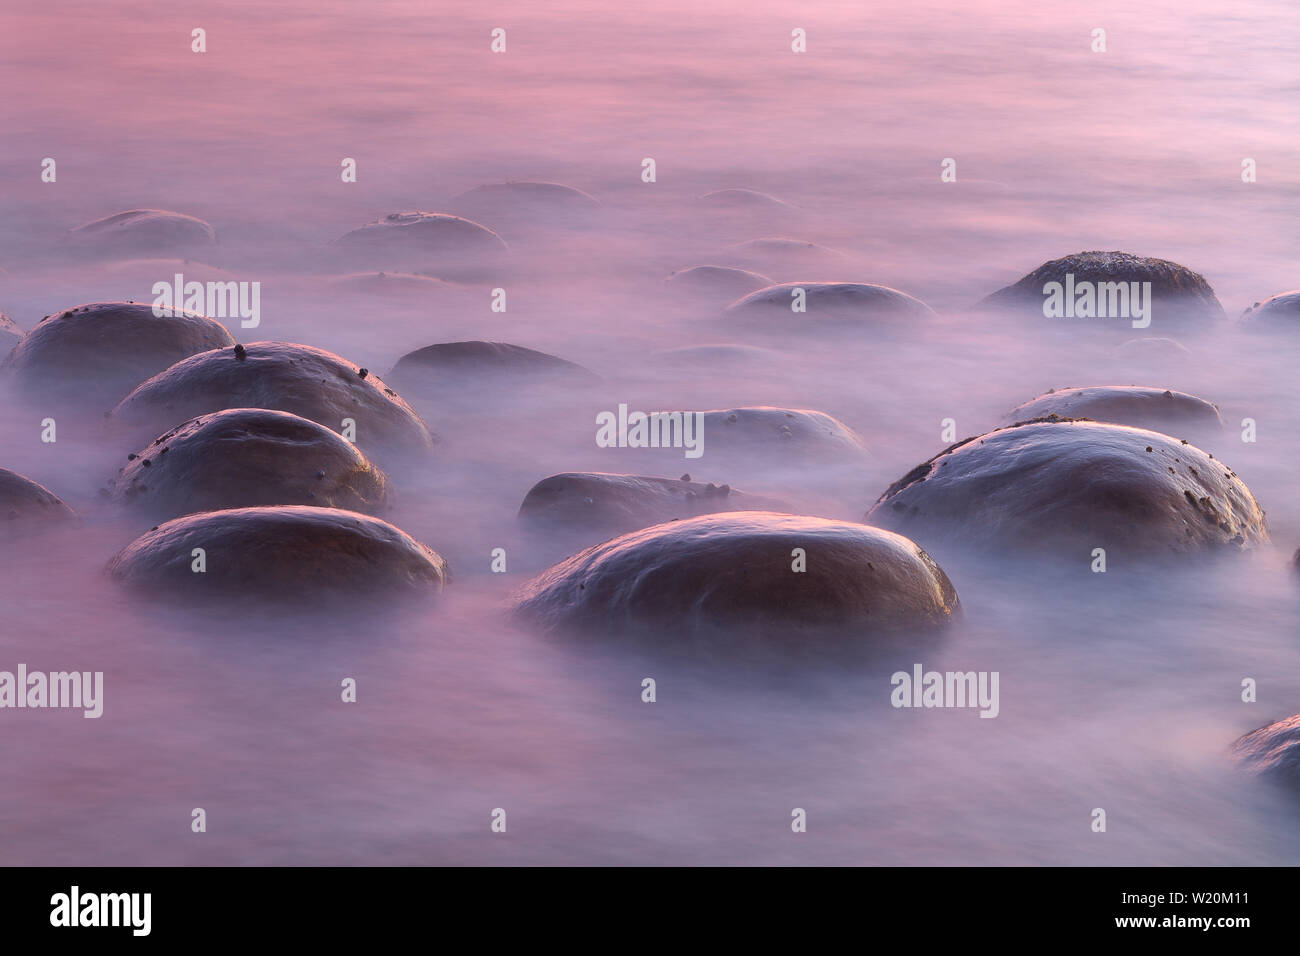 Twilight Wash on Submerged Concretions, Bowling Ball Beach, Mendocino County, California, USA Stock Photo